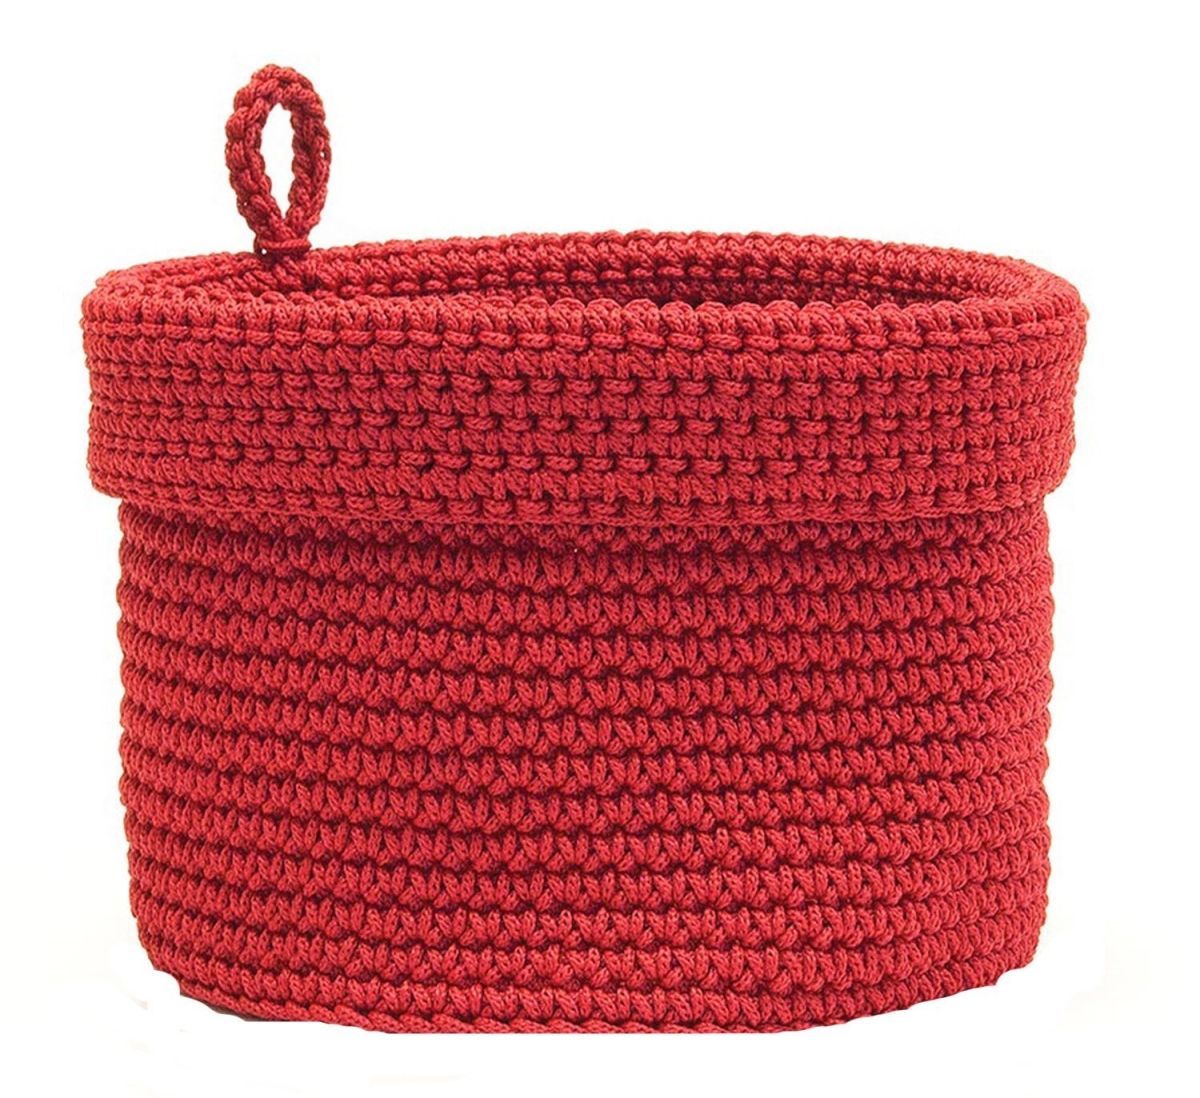 10 X 10 In. Mode Crochet Basket With Loop, Ruby Red